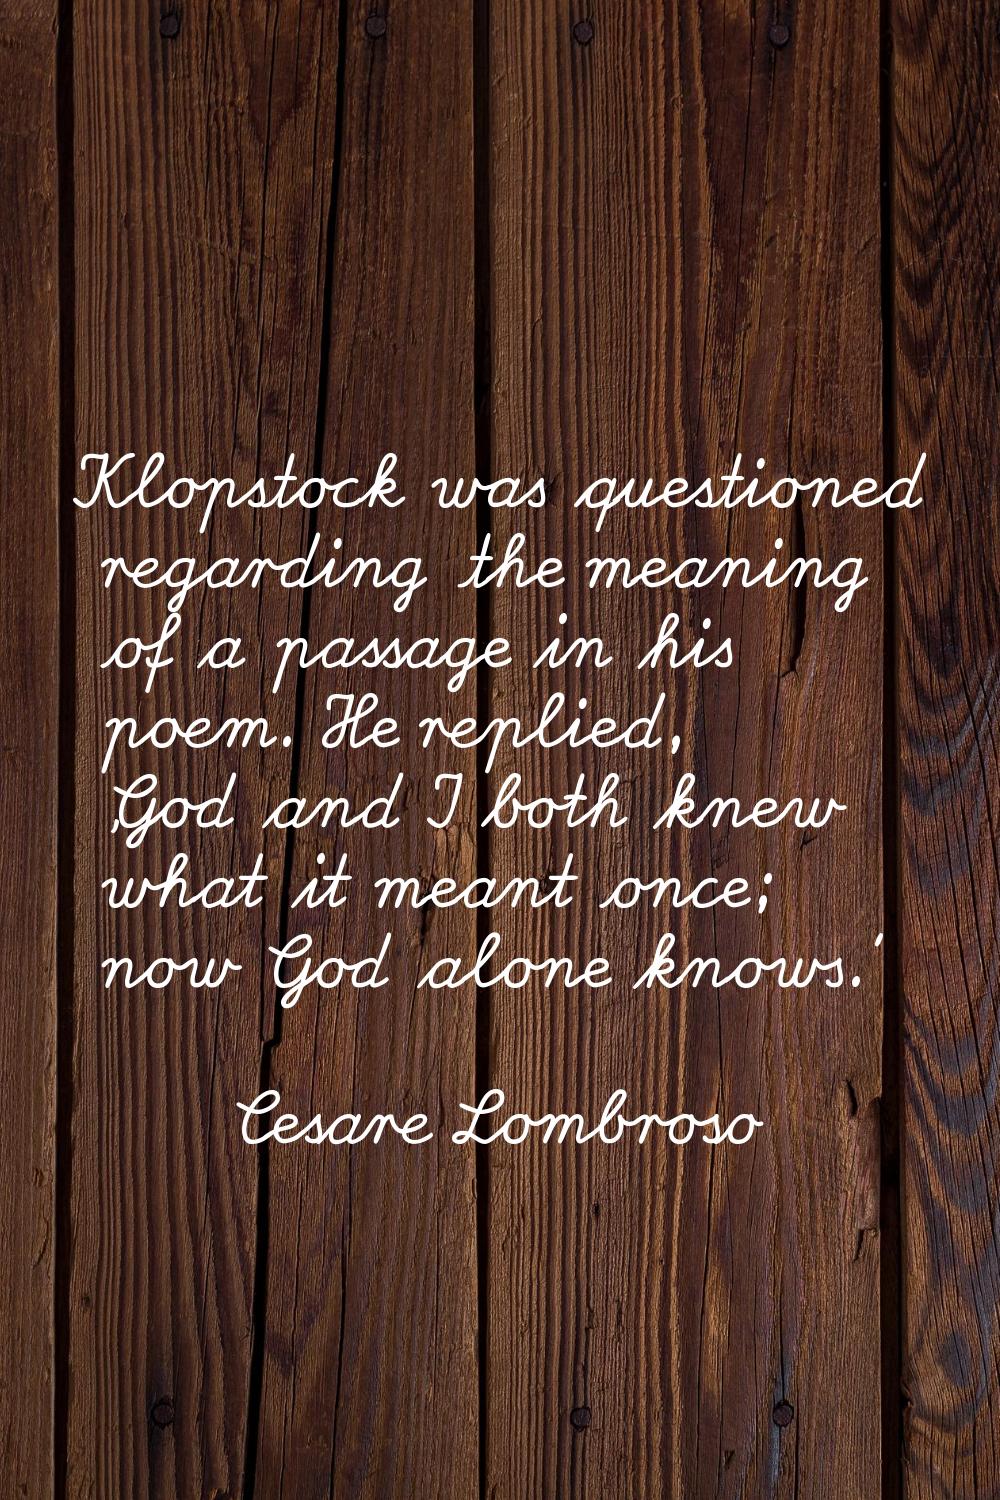 Klopstock was questioned regarding the meaning of a passage in his poem. He replied, 'God and I bot